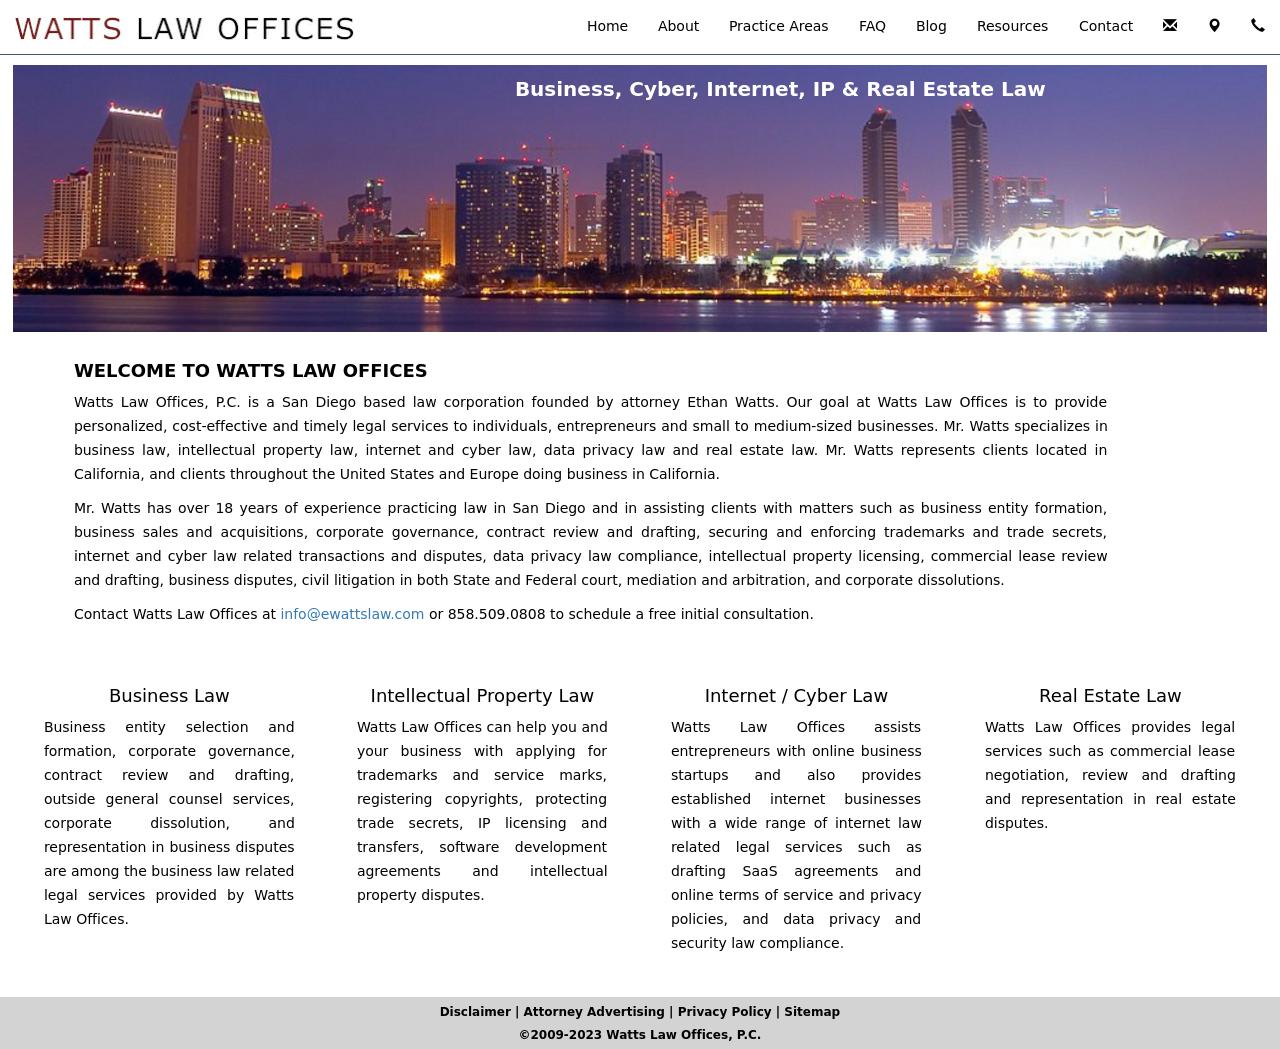 Watts Law Offices, P.C. - San Diego CA Lawyers